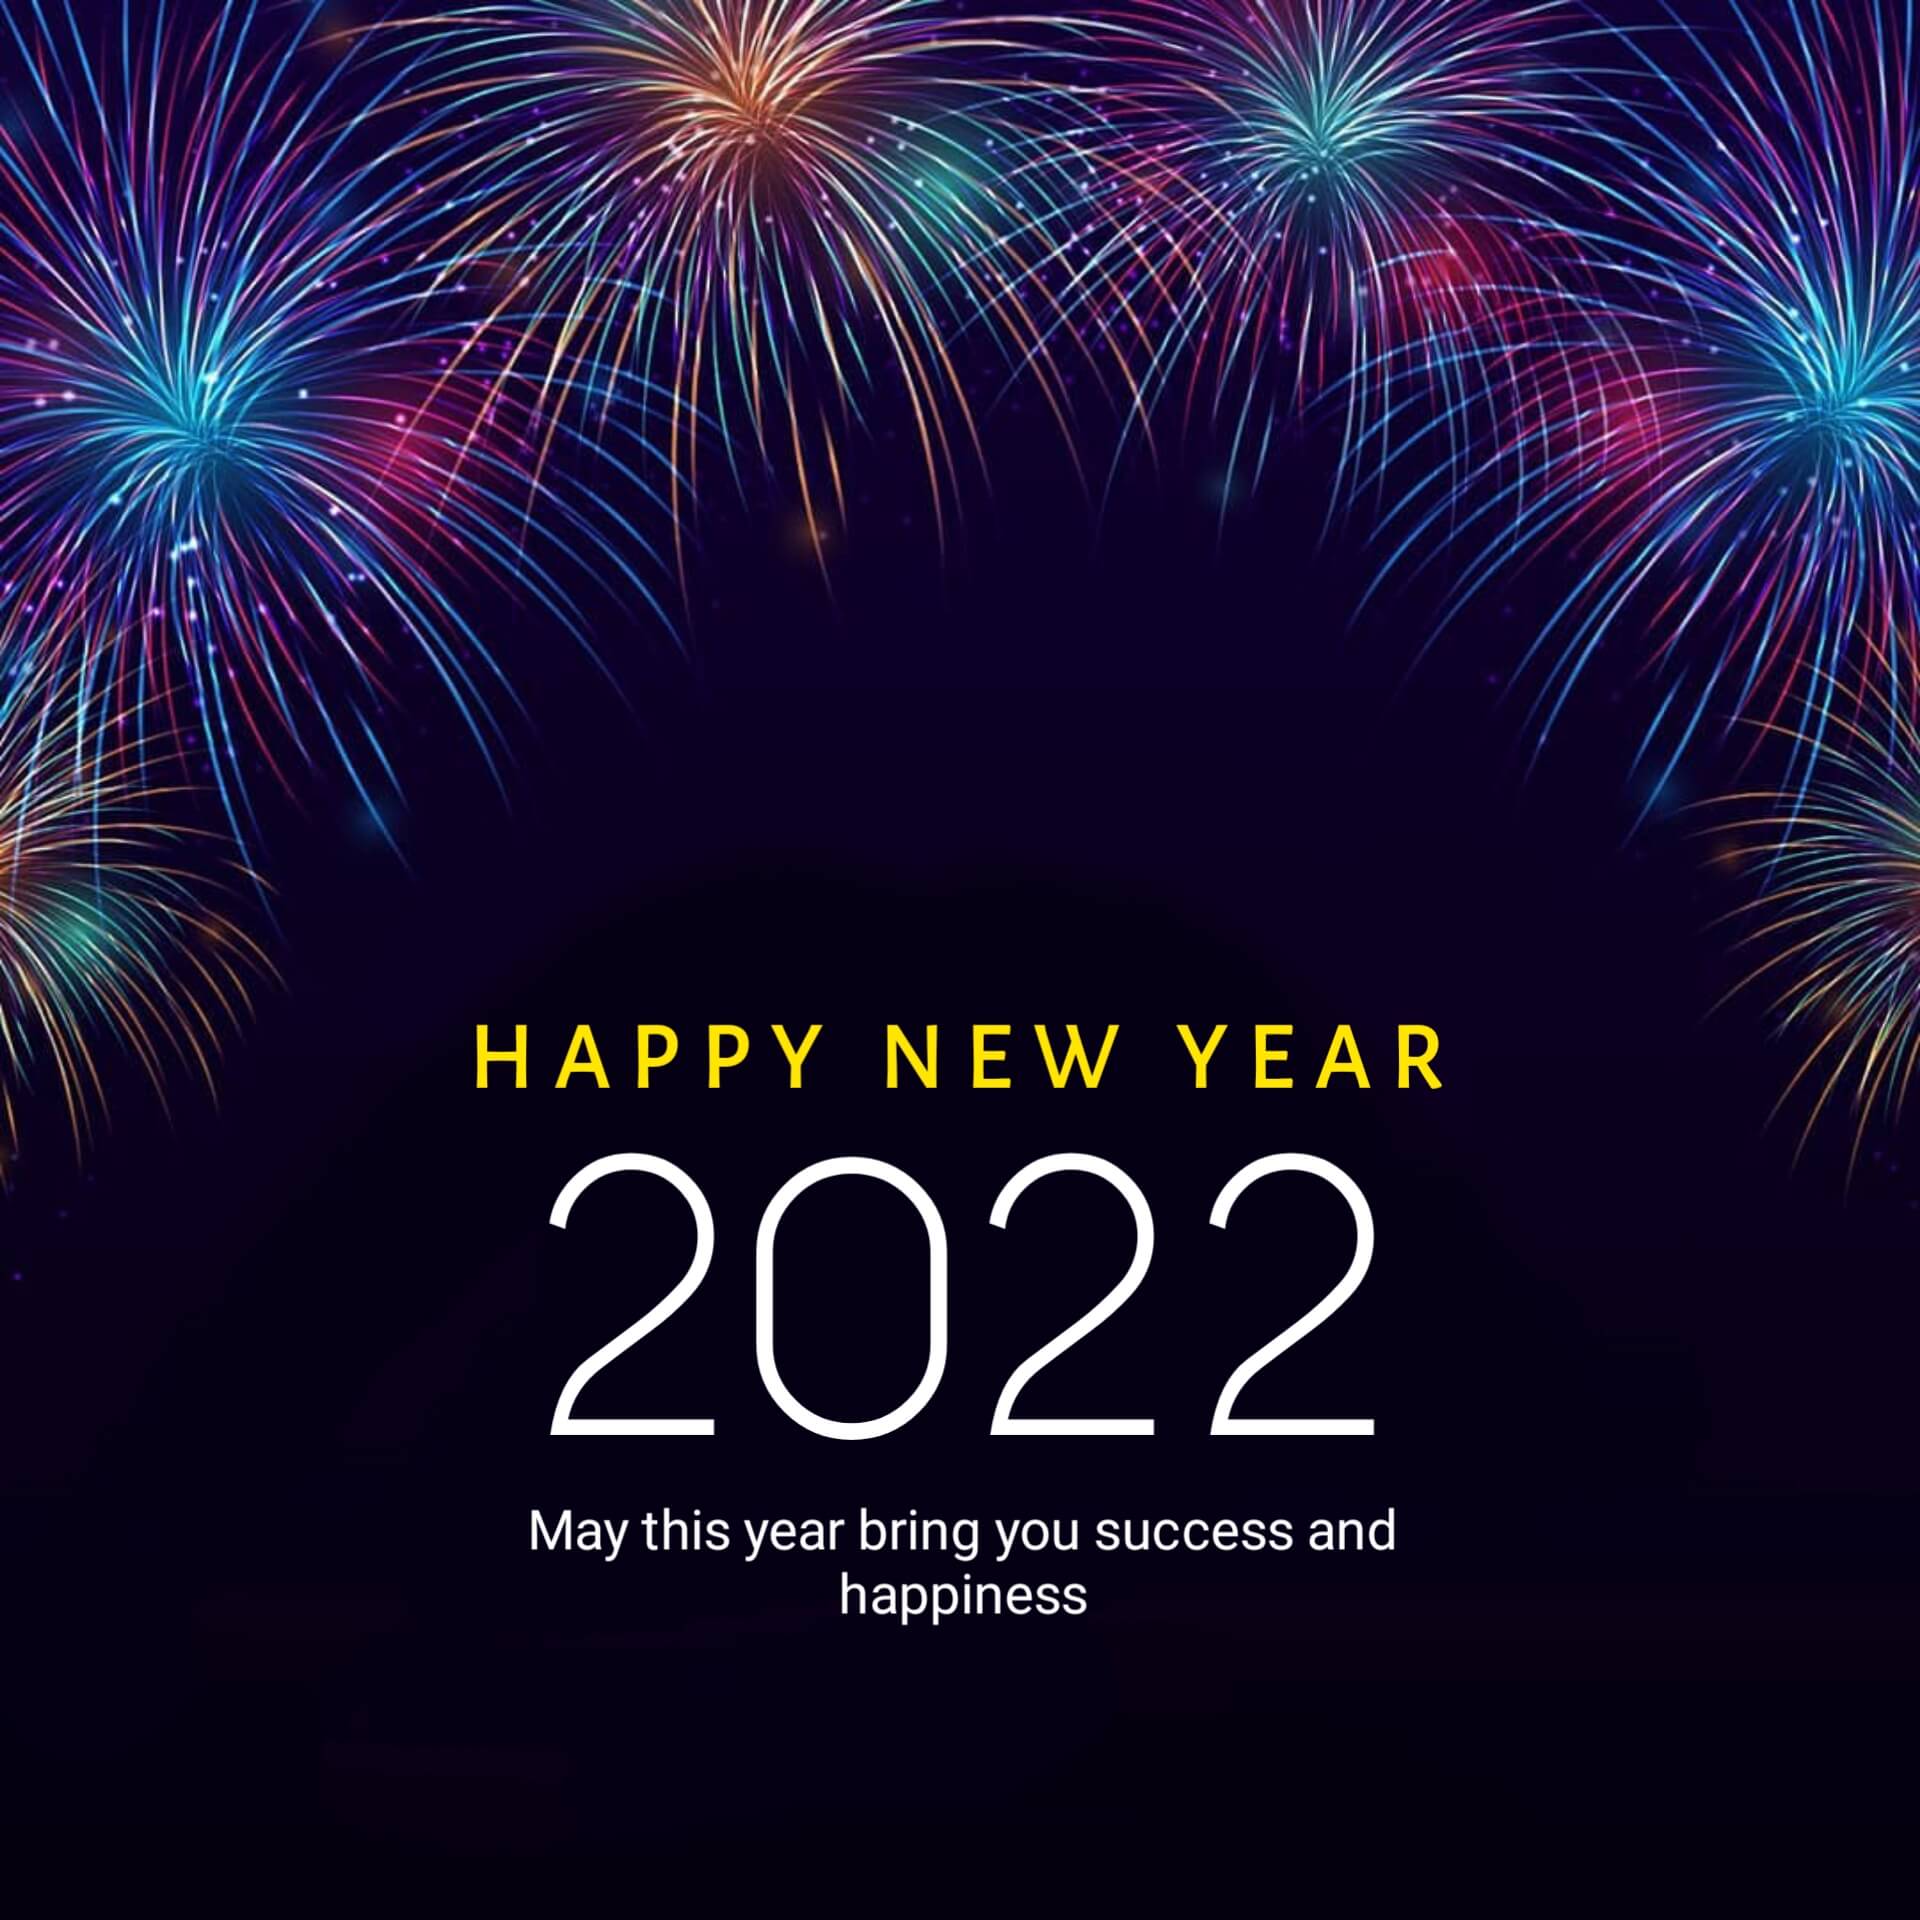 2022 New Year Images